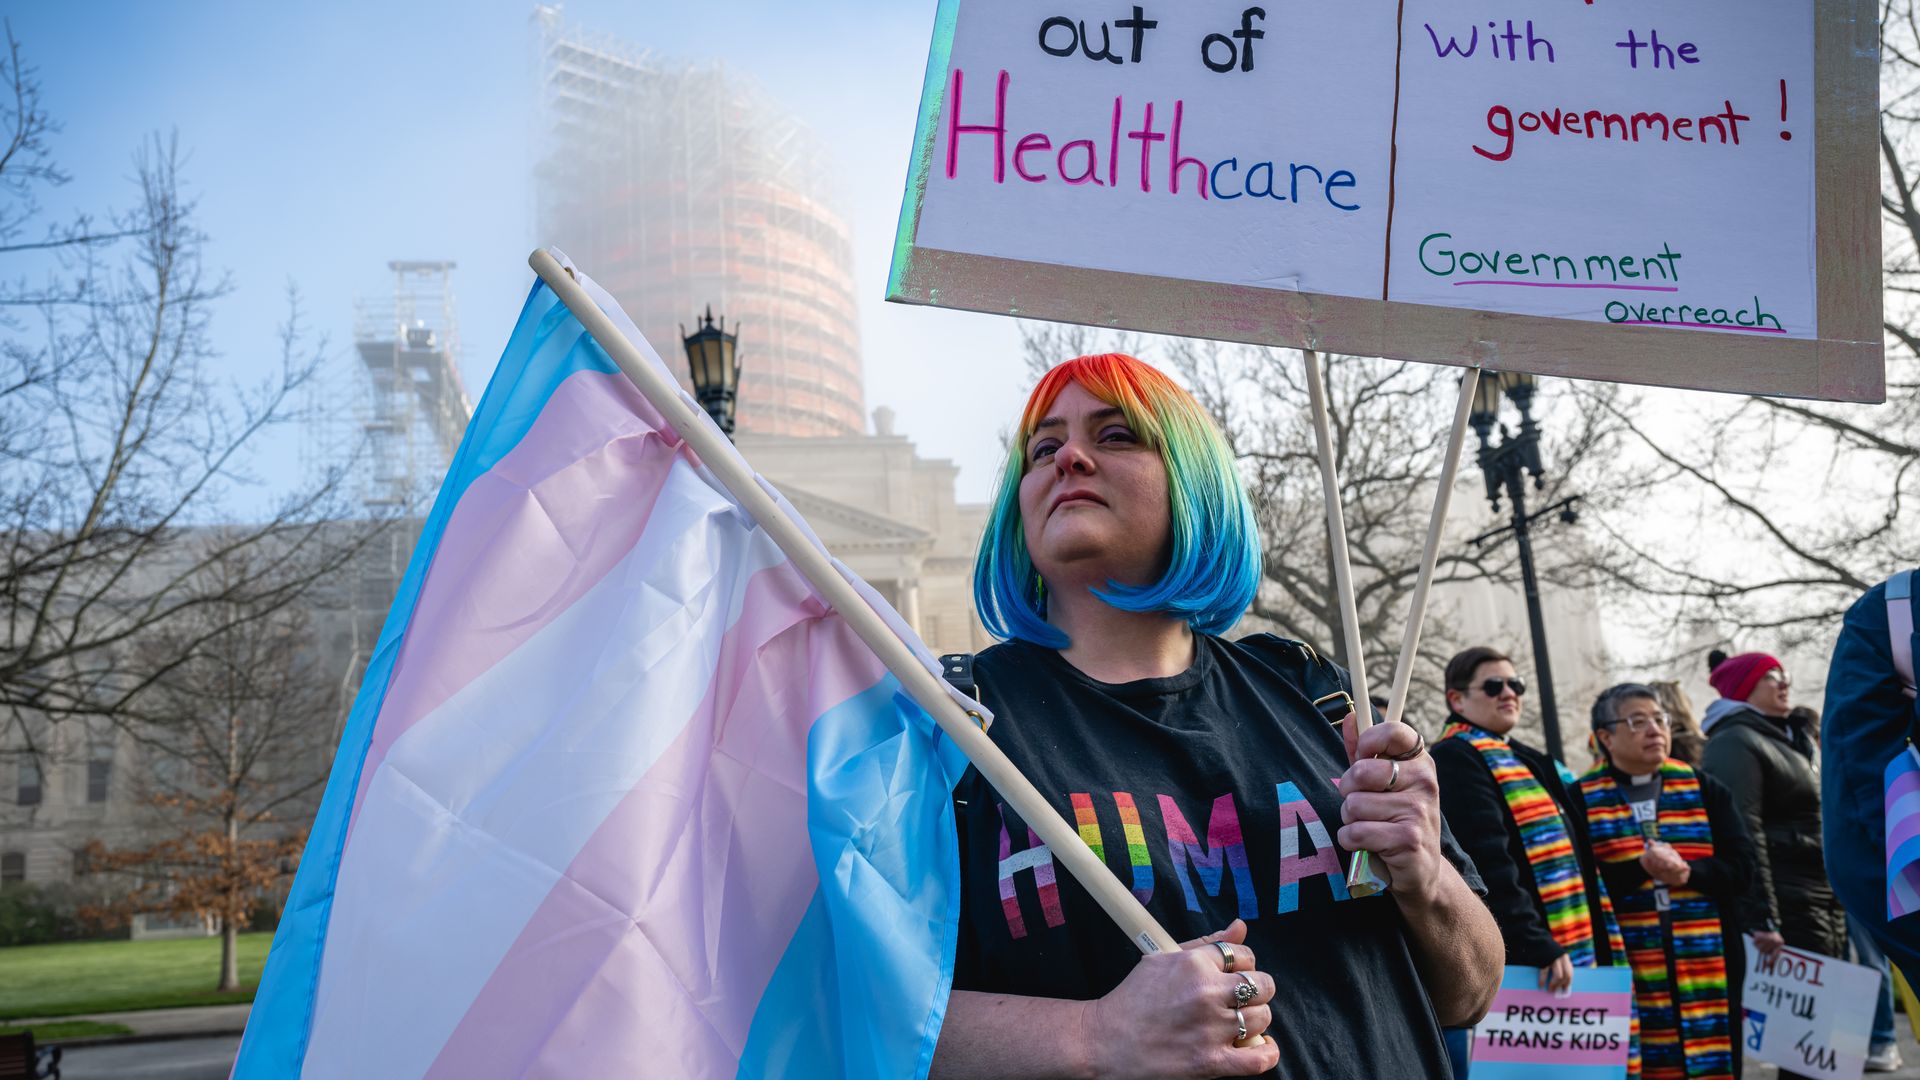 A person with rainbow-colored hair down to the chin hold a blue, pink and white striped flag and a handmade sign.